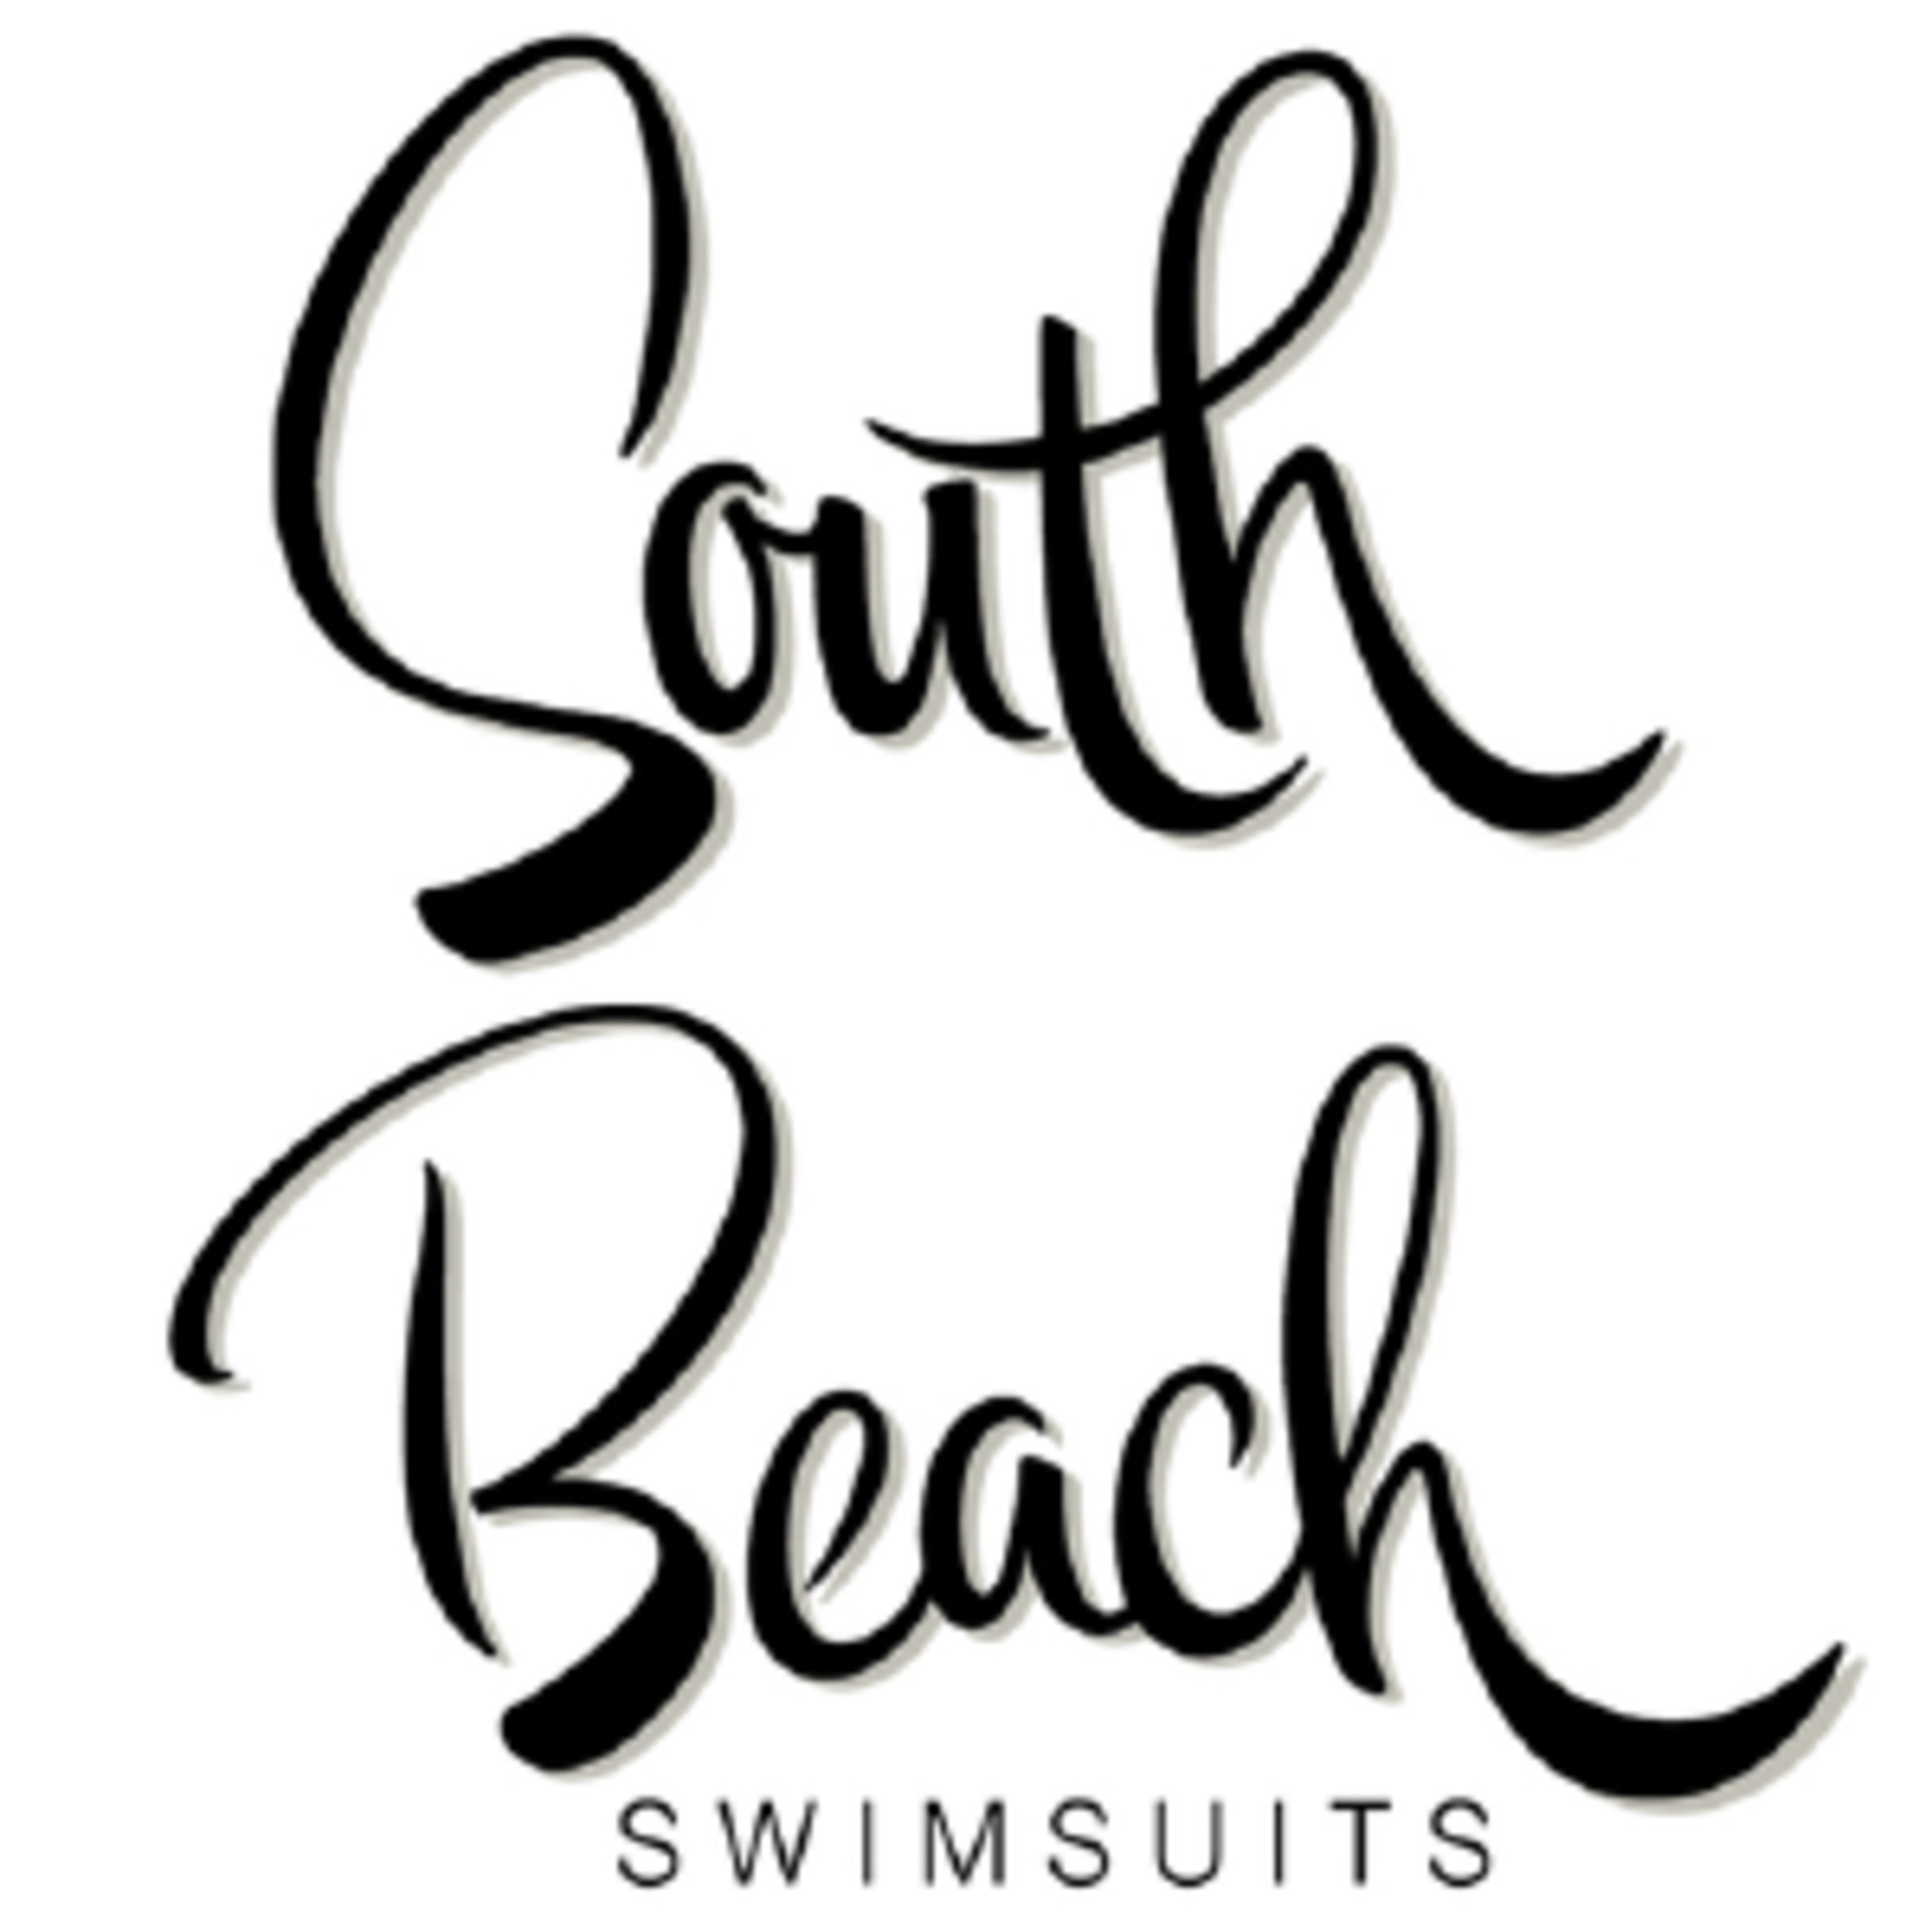 South Beach SwimsuitsCode